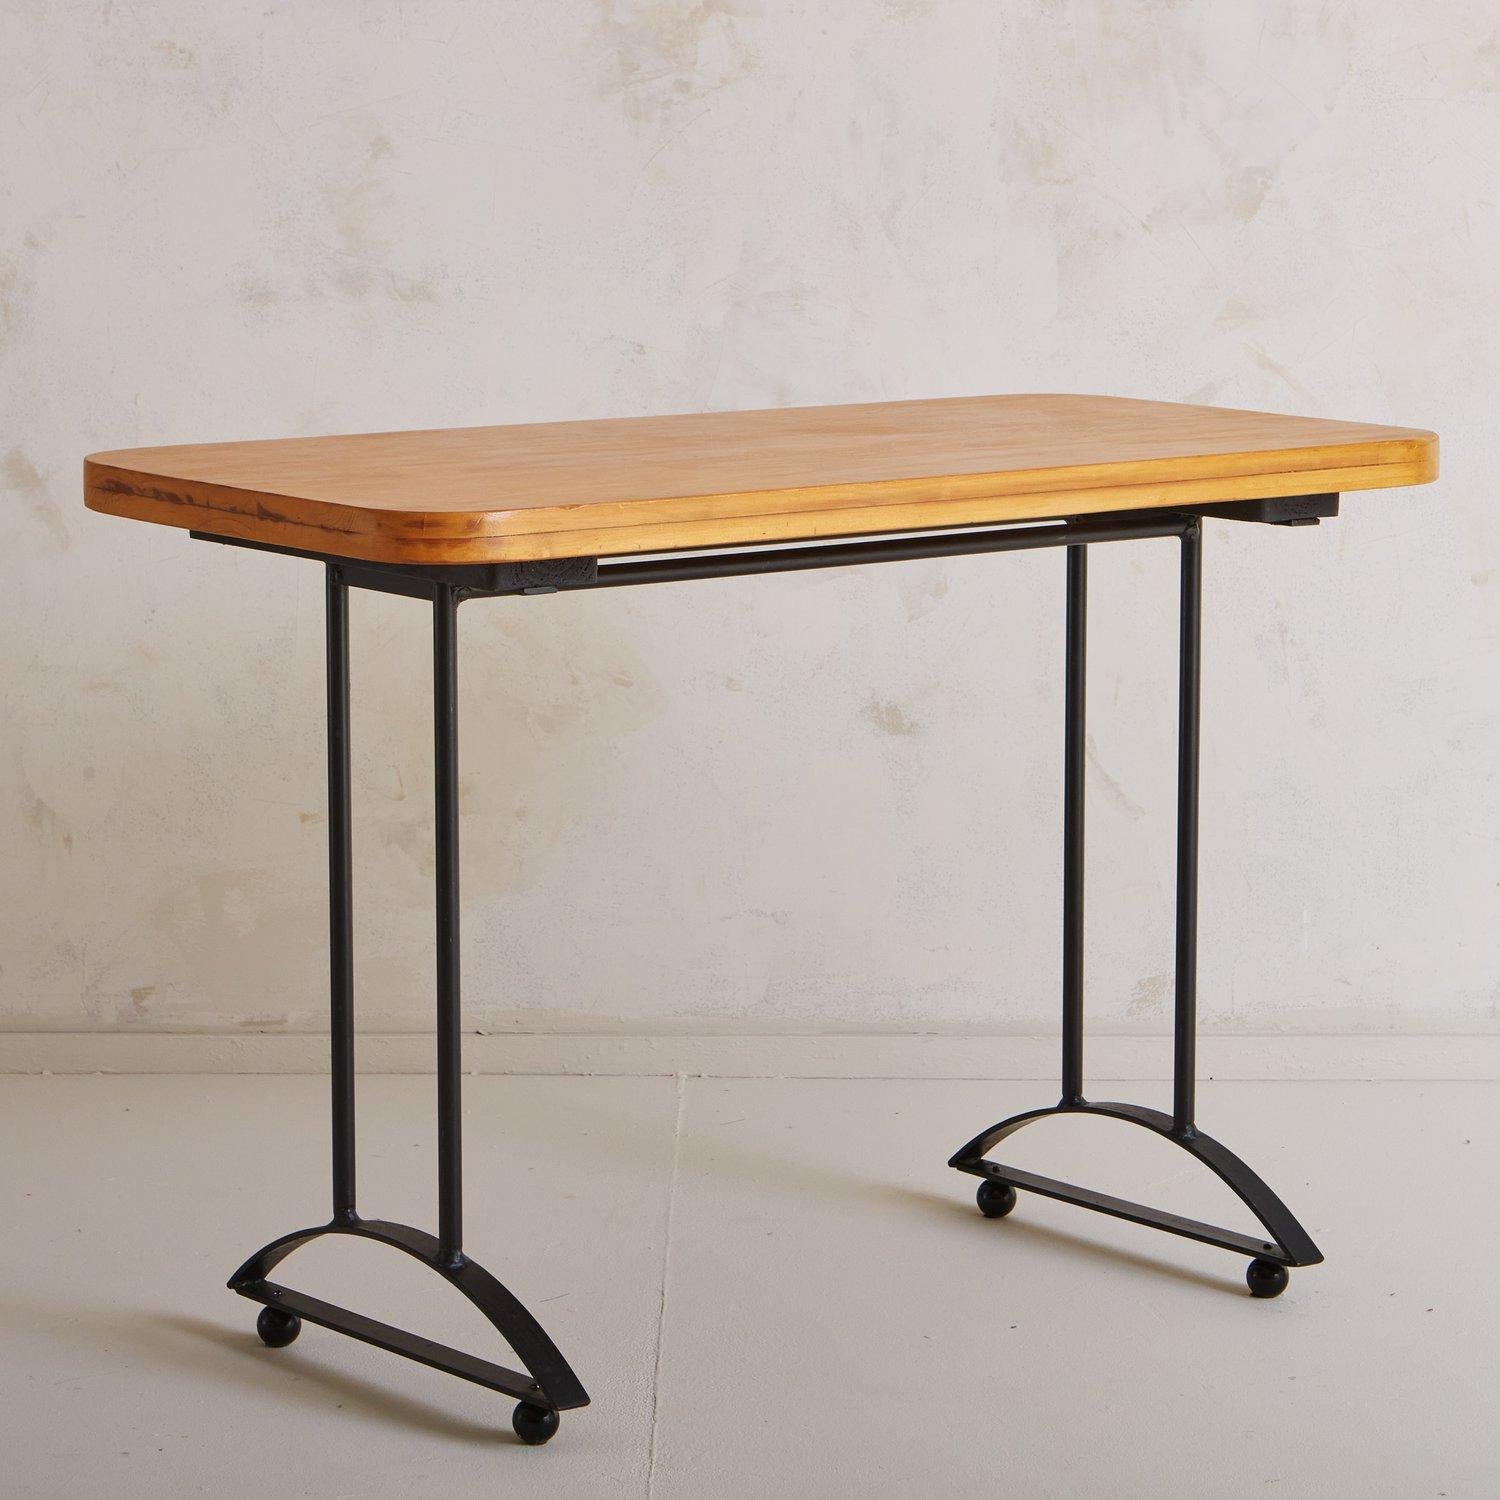 A Postmodern desk featuring a rectangular birch table top with rounded corners and beautiful graining. It has a black metal base with tubular legs and demilune details with round feet. Sourced in France, 20th Century.

